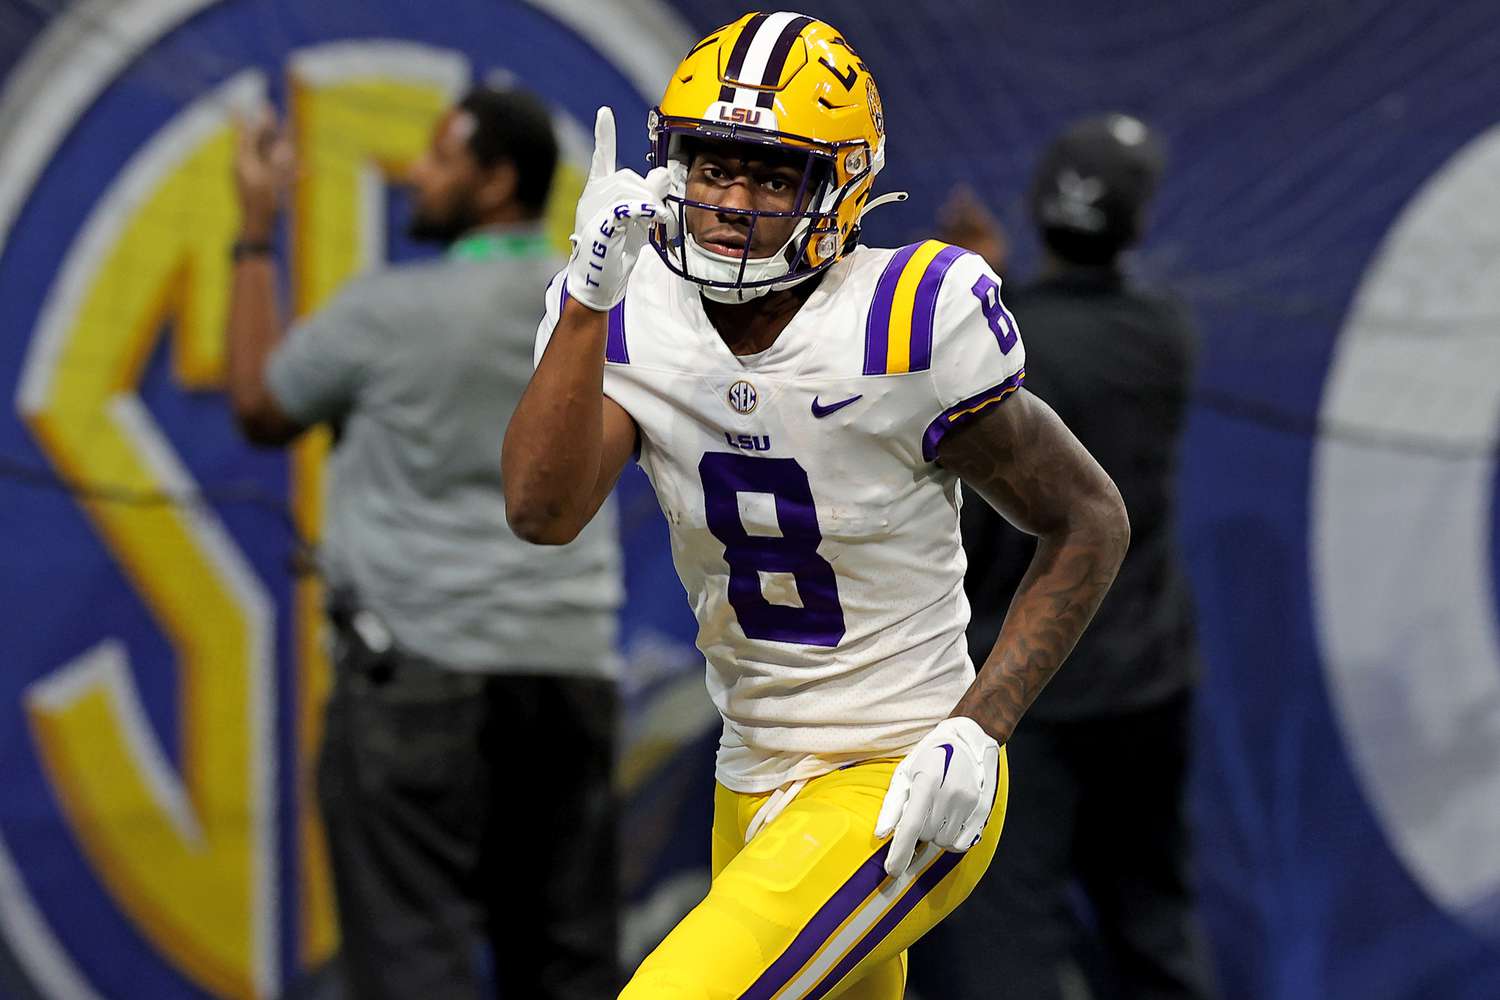 Malik Nabers #8 of the LSU Tigers celebrates after scoring a 34 yard touchdown against the Georgia Bulldogs during the third quarter in the SEC Championship game at Mercedes-Benz Stadium on December 03, 2022 in Atlanta, Georgia.